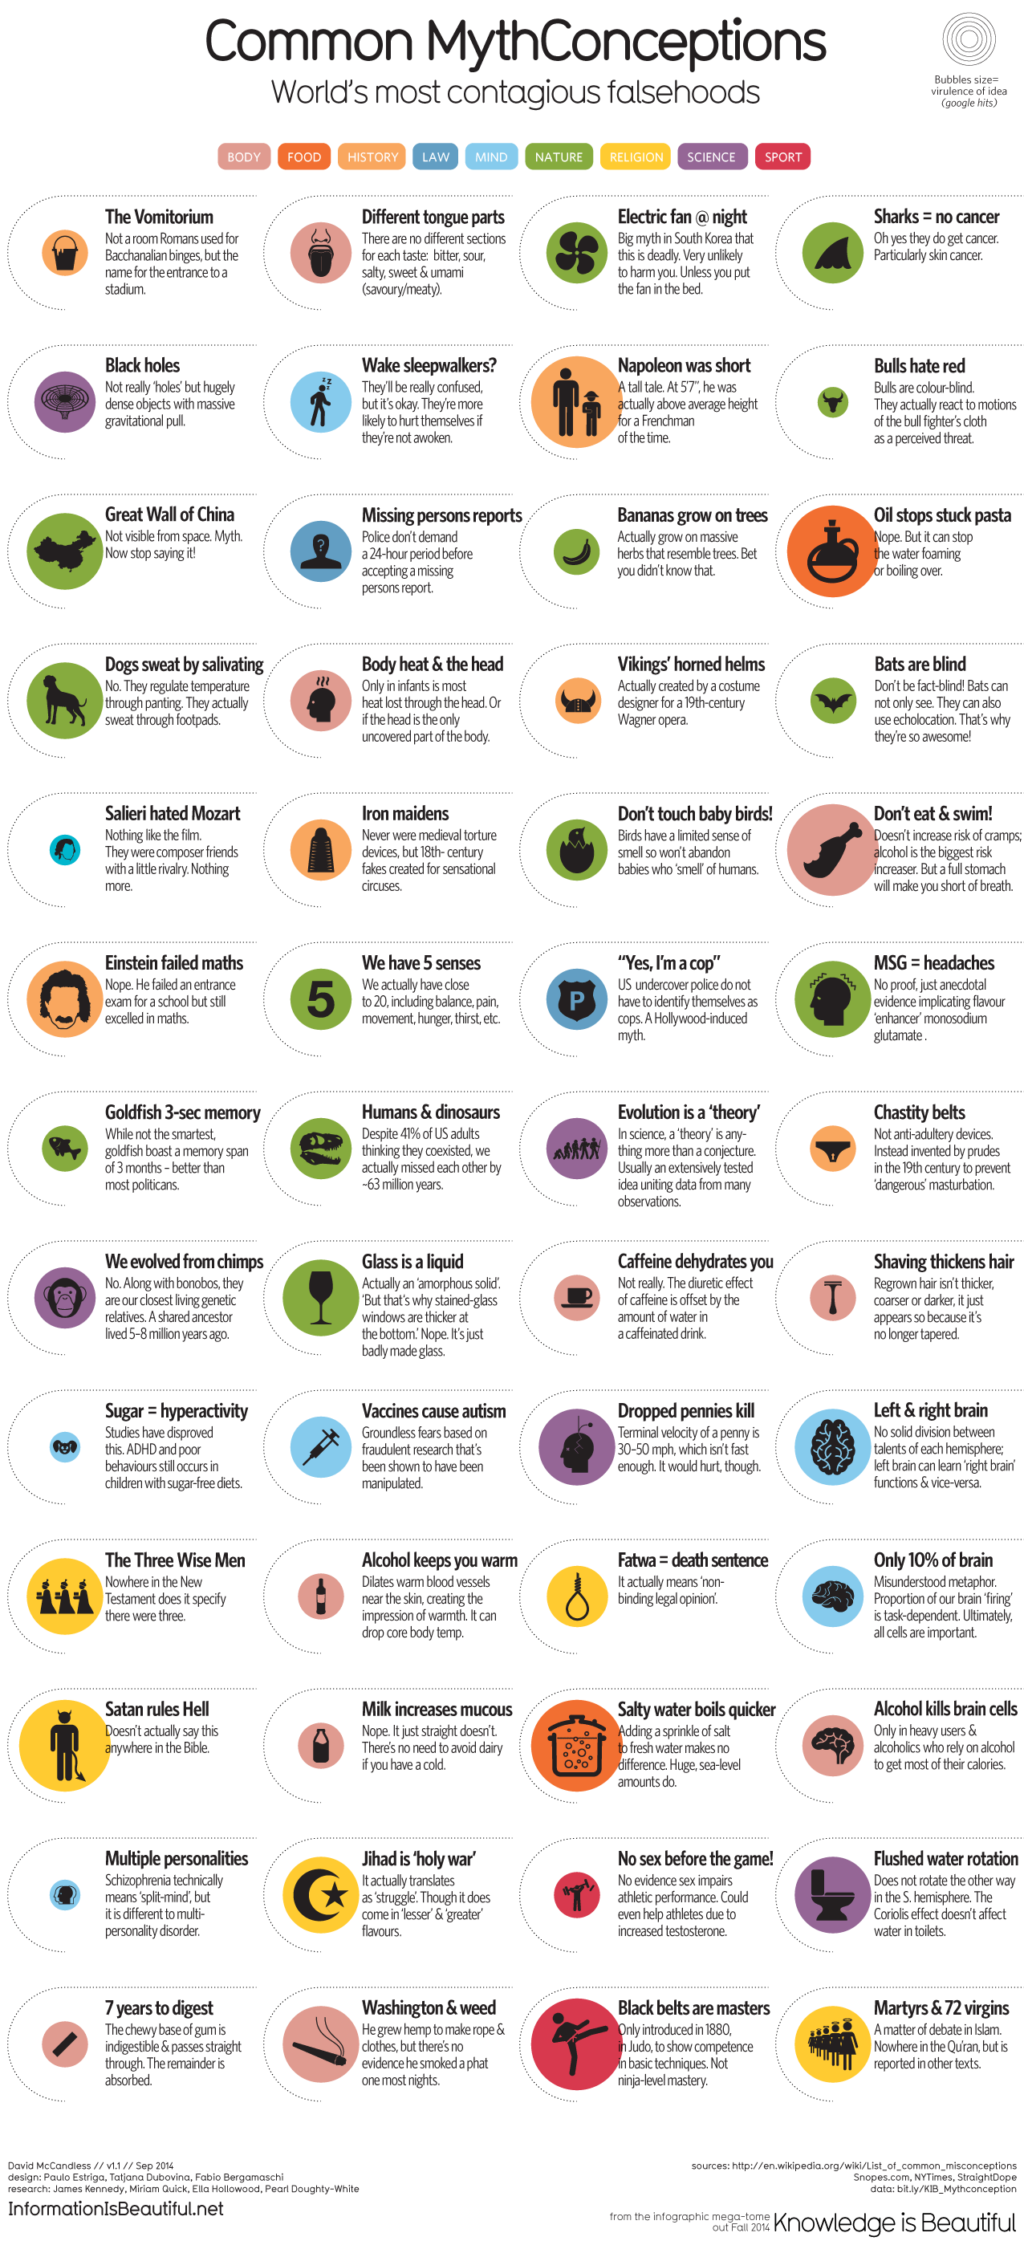 52 Common-Mythconceptions_Oct22nd